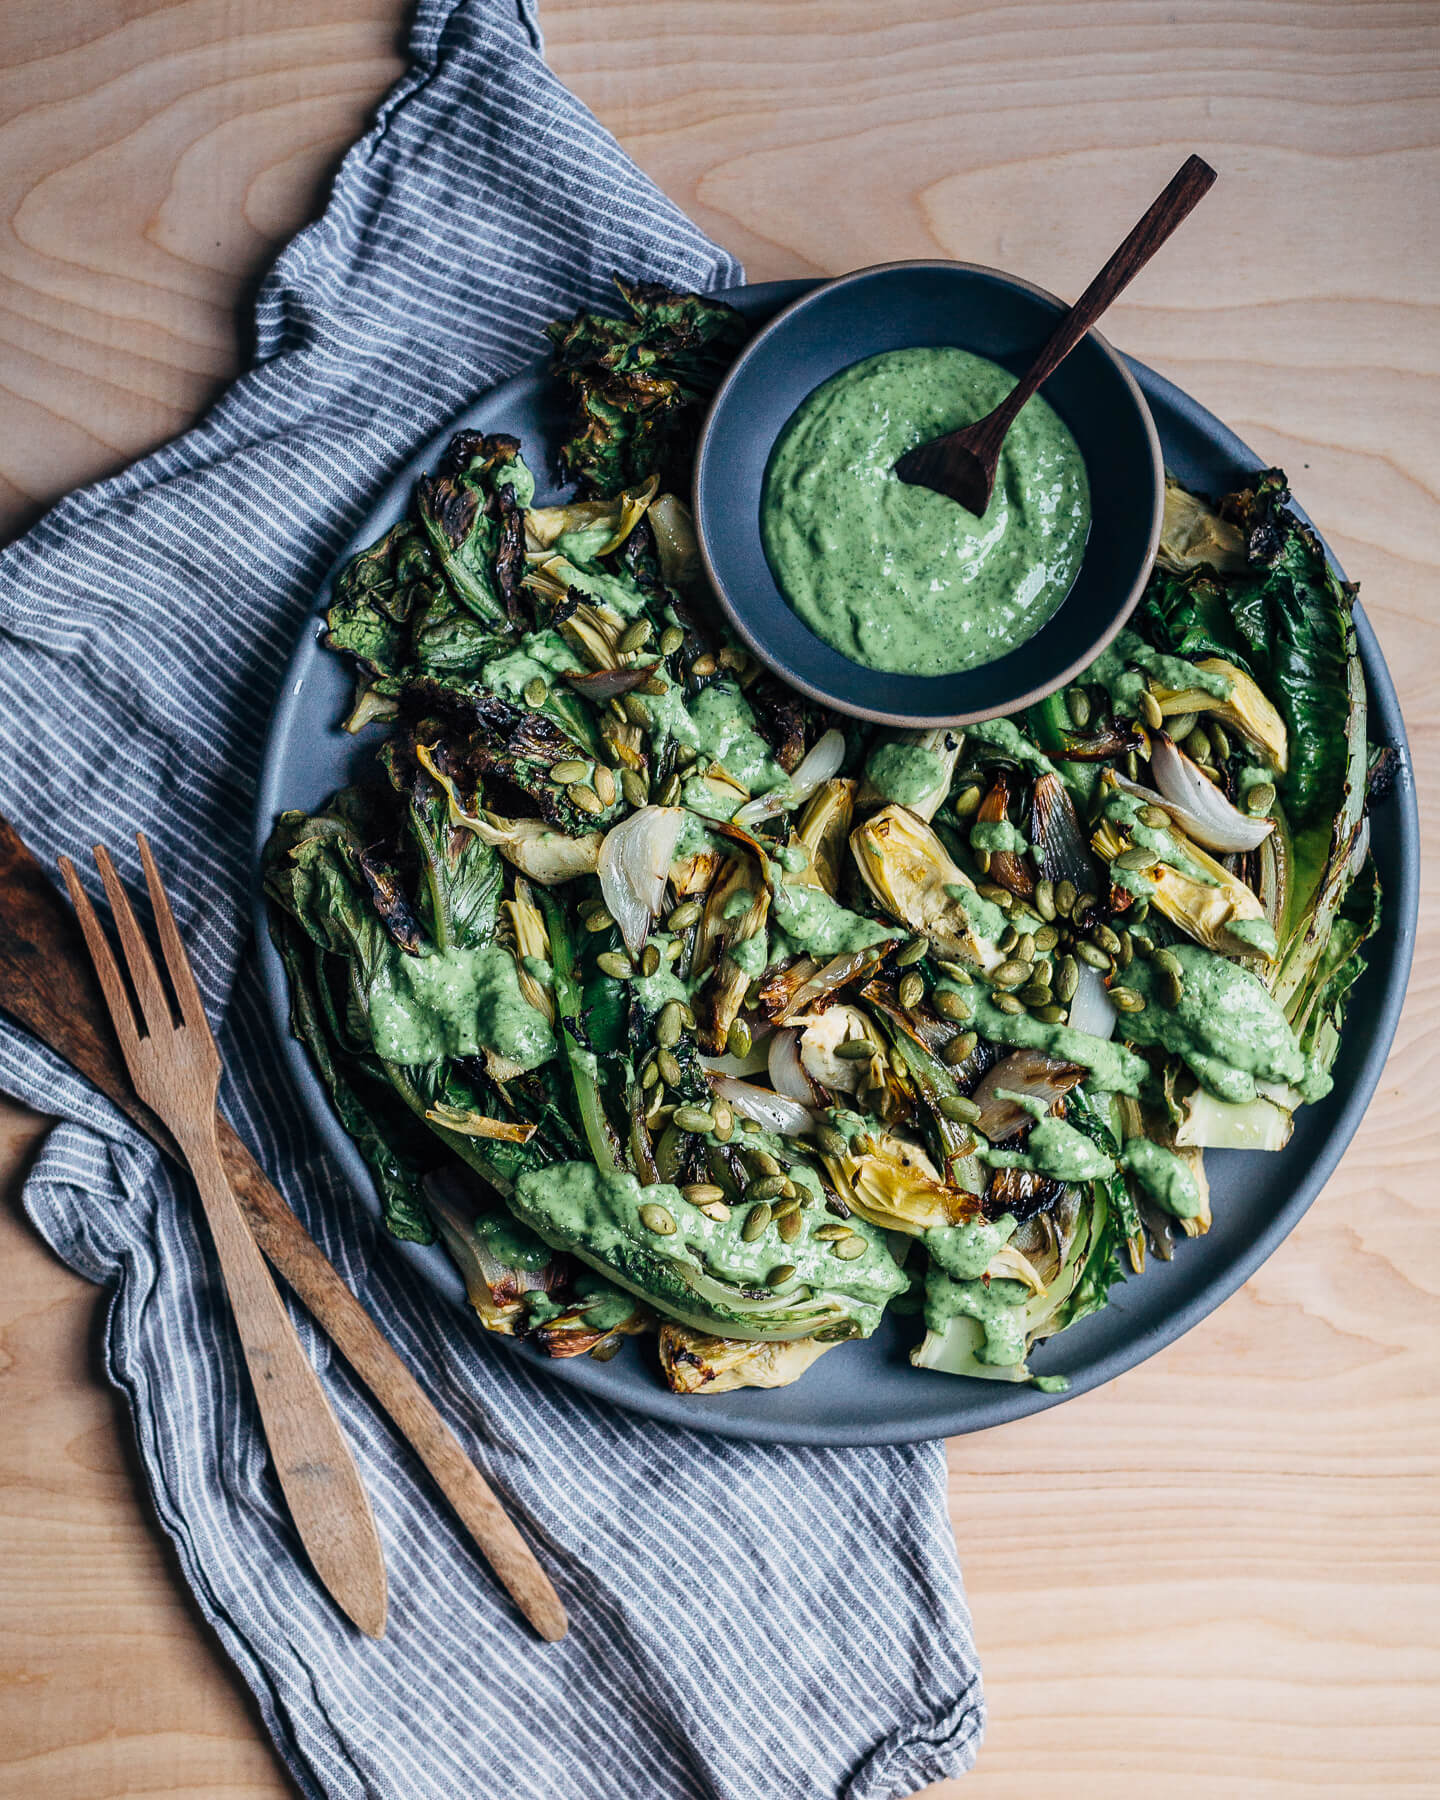 grilled romaine hearts with avocado-kefir green goddess dressing // brooklyn supper